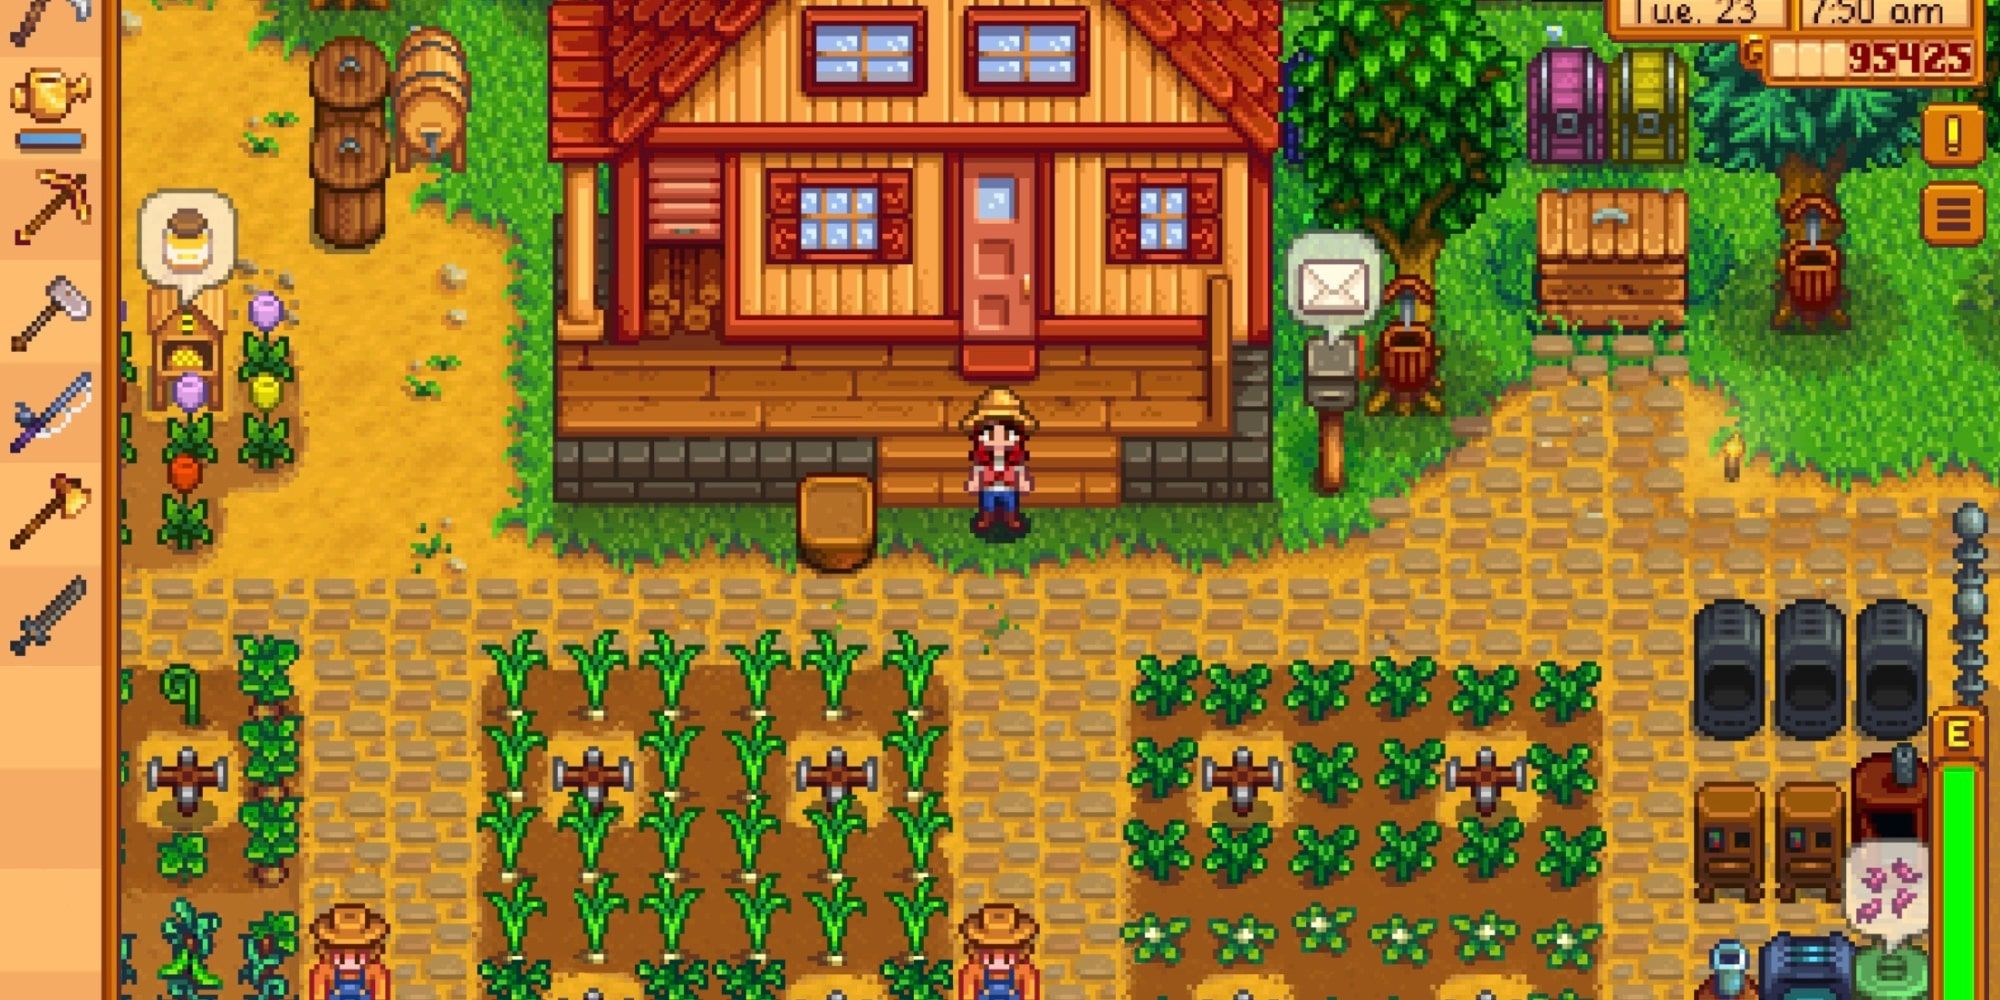 Image from the game Stardew Valley featuring the player character standing inside their farmland